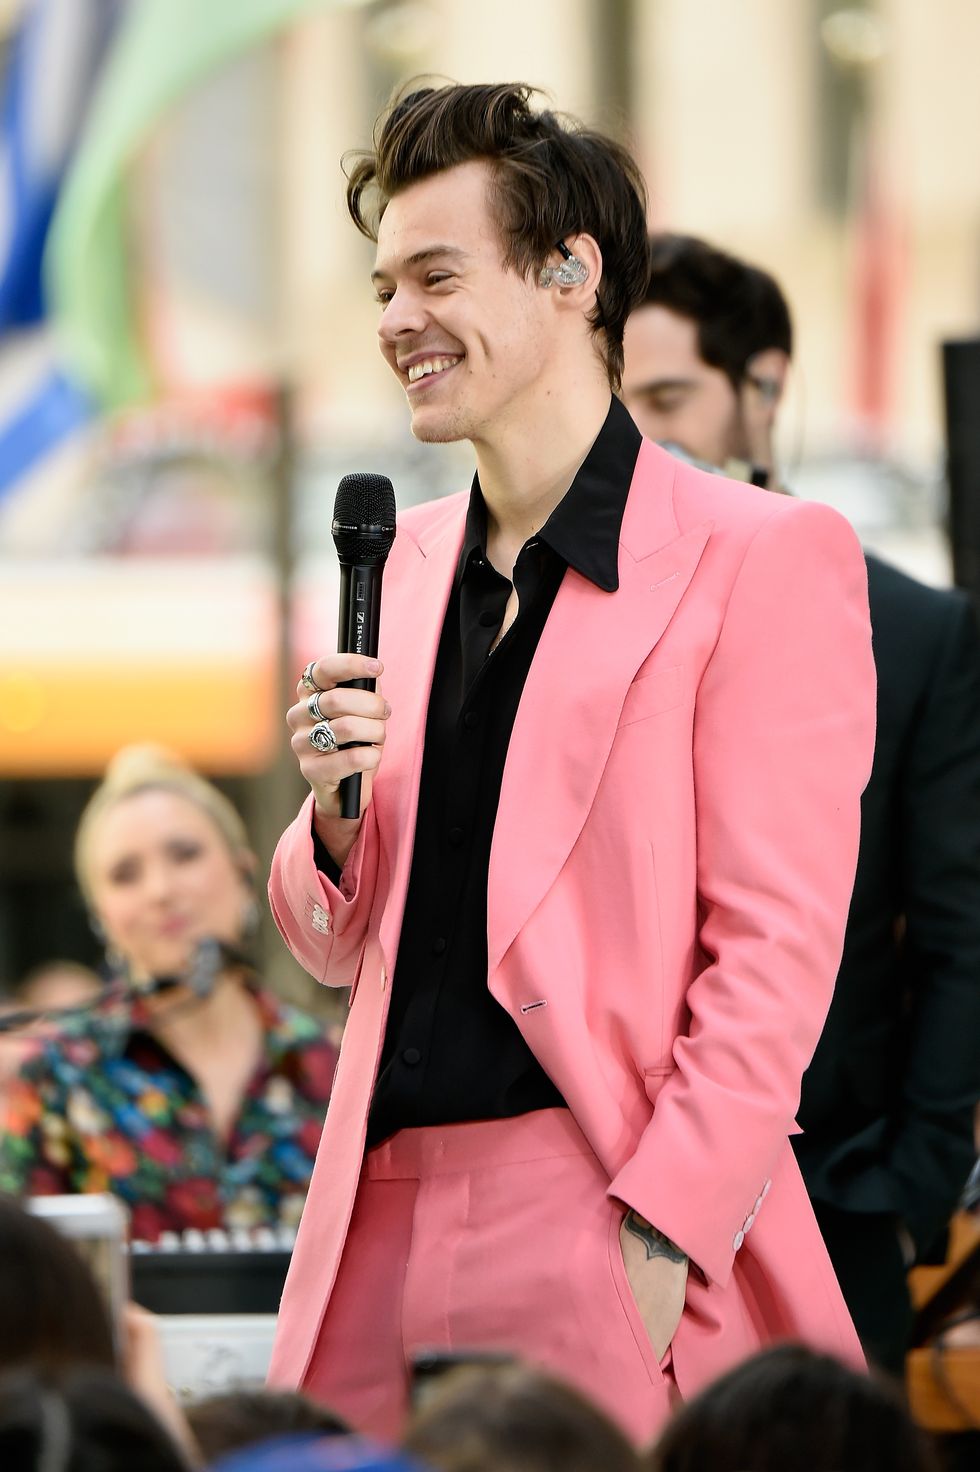 new york, ny may 09 harry styles performs on stage at the citi concert series on today at rockefeller center on may 9, 2017 in new york city photo by kevin mazurgetty images for citi